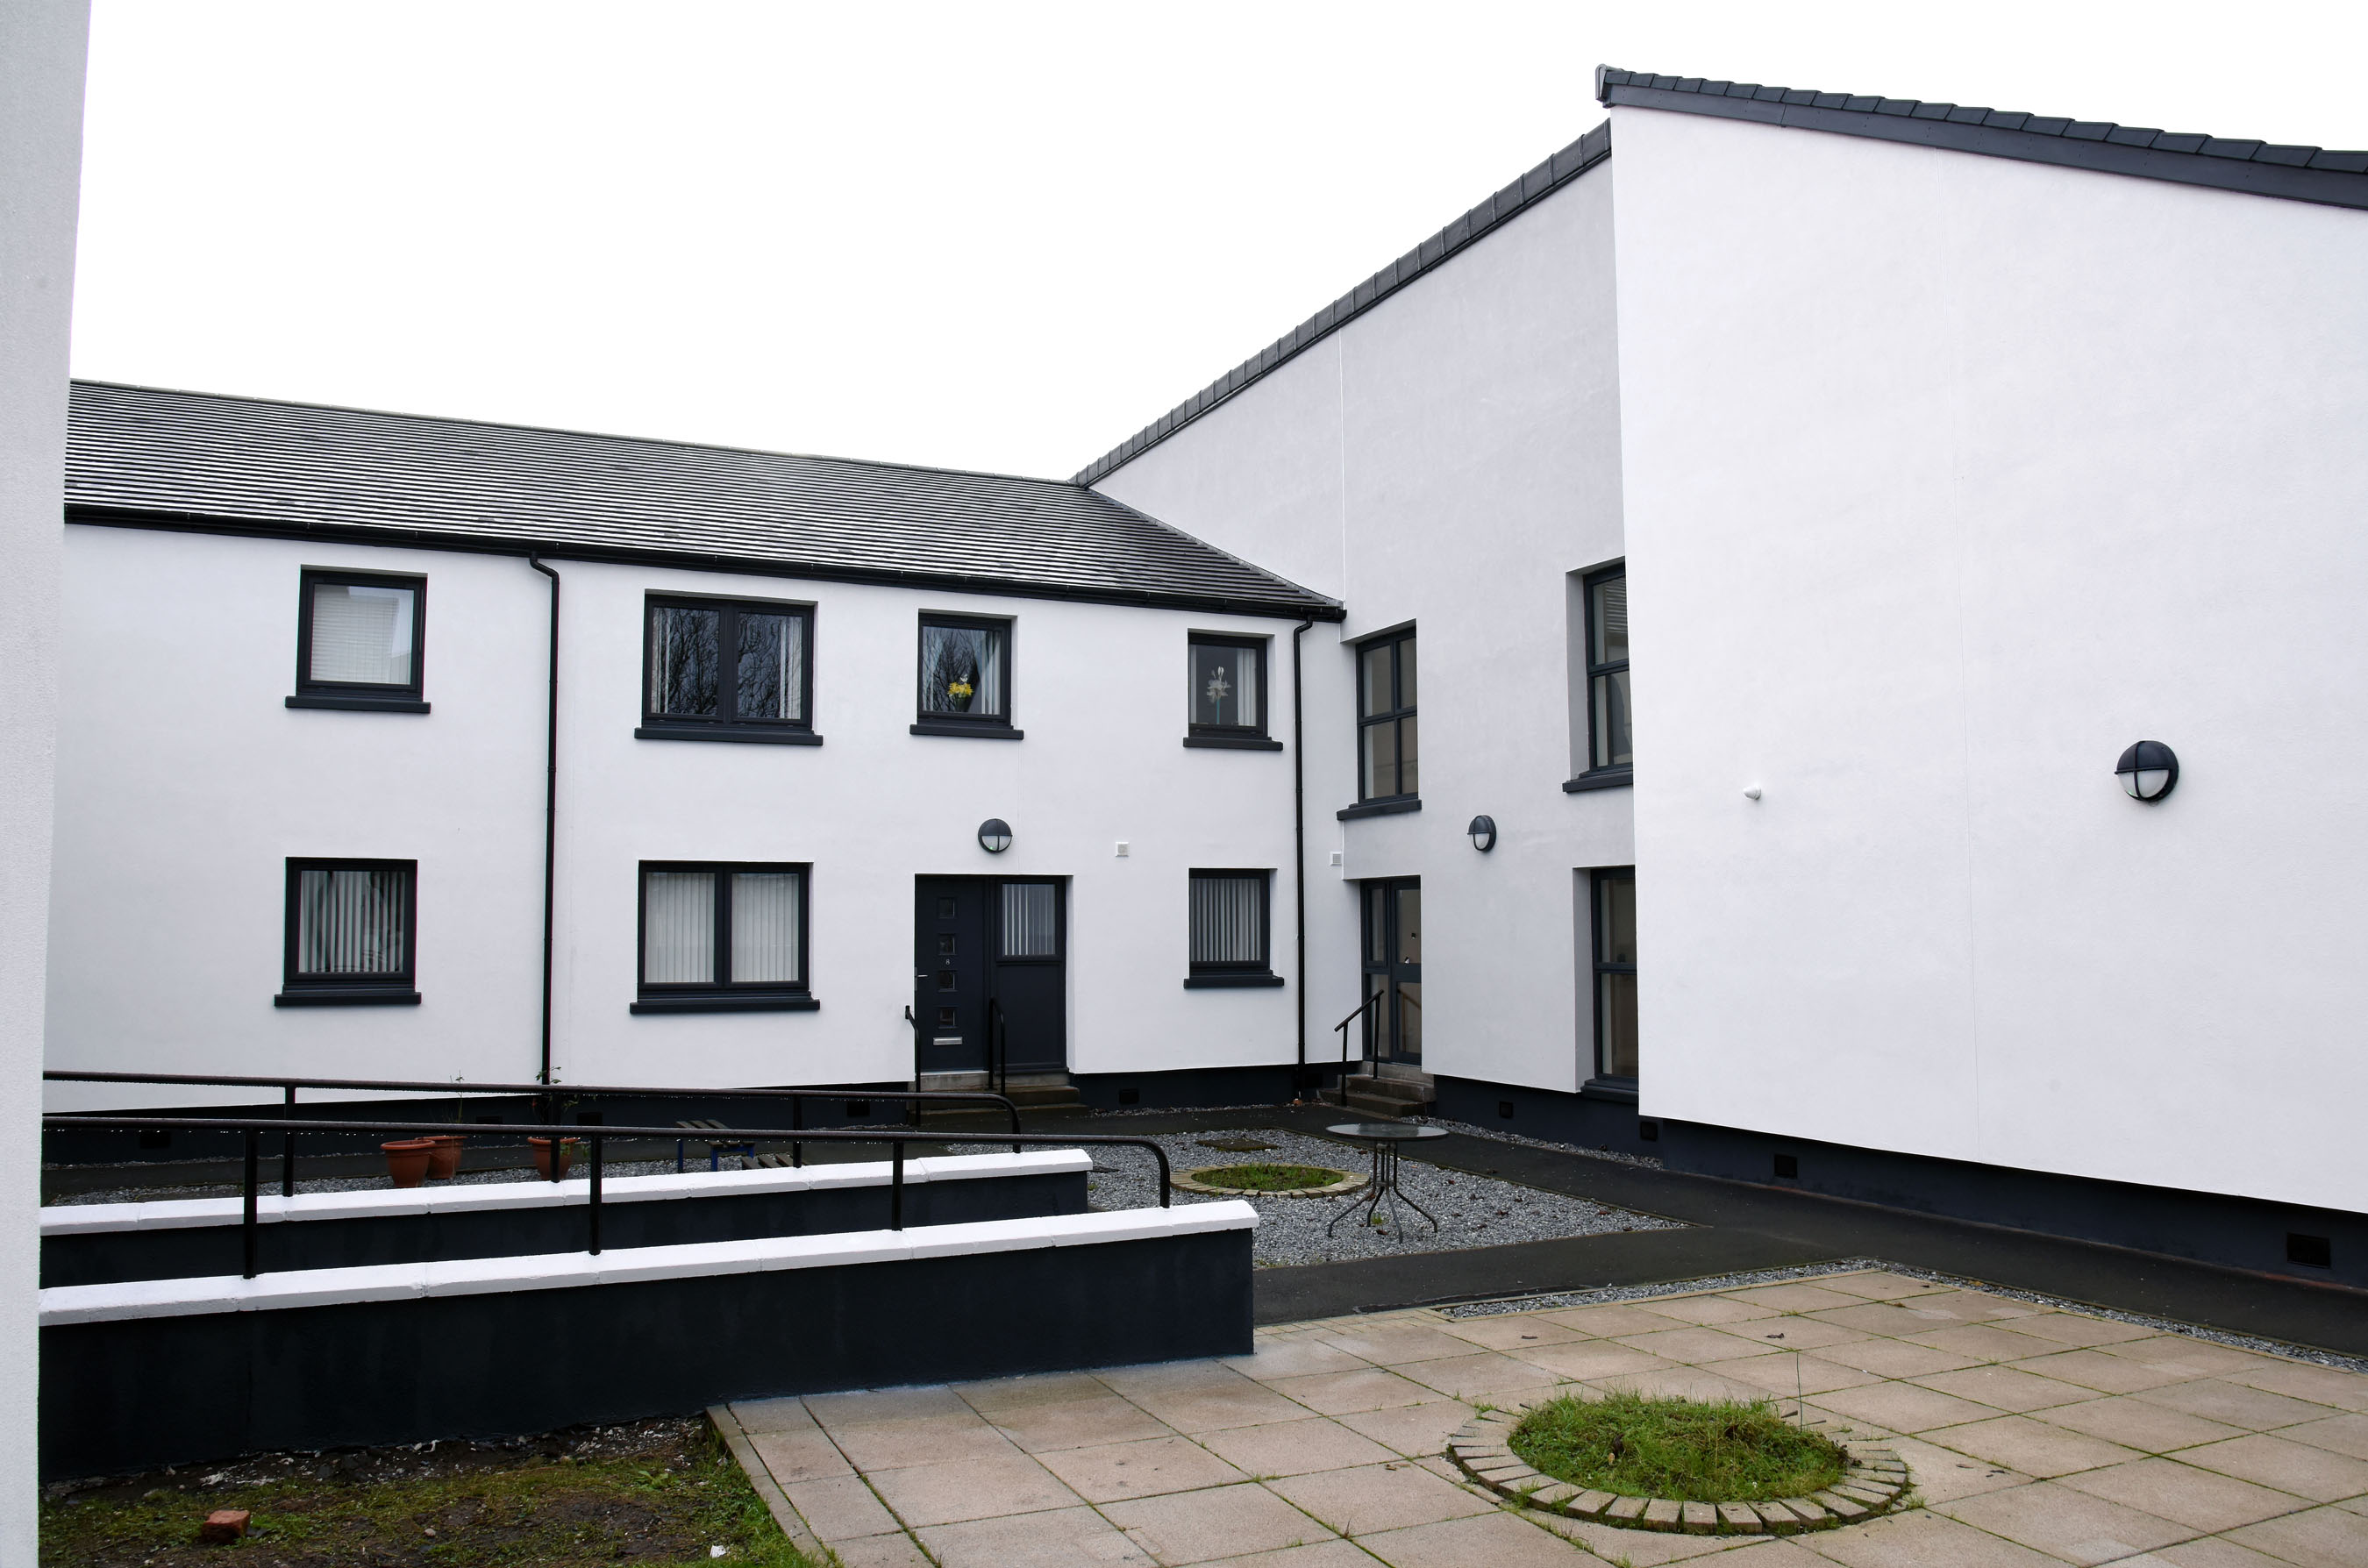 North Ayrshire sheltered housing development re-opens after £2.2m revamp